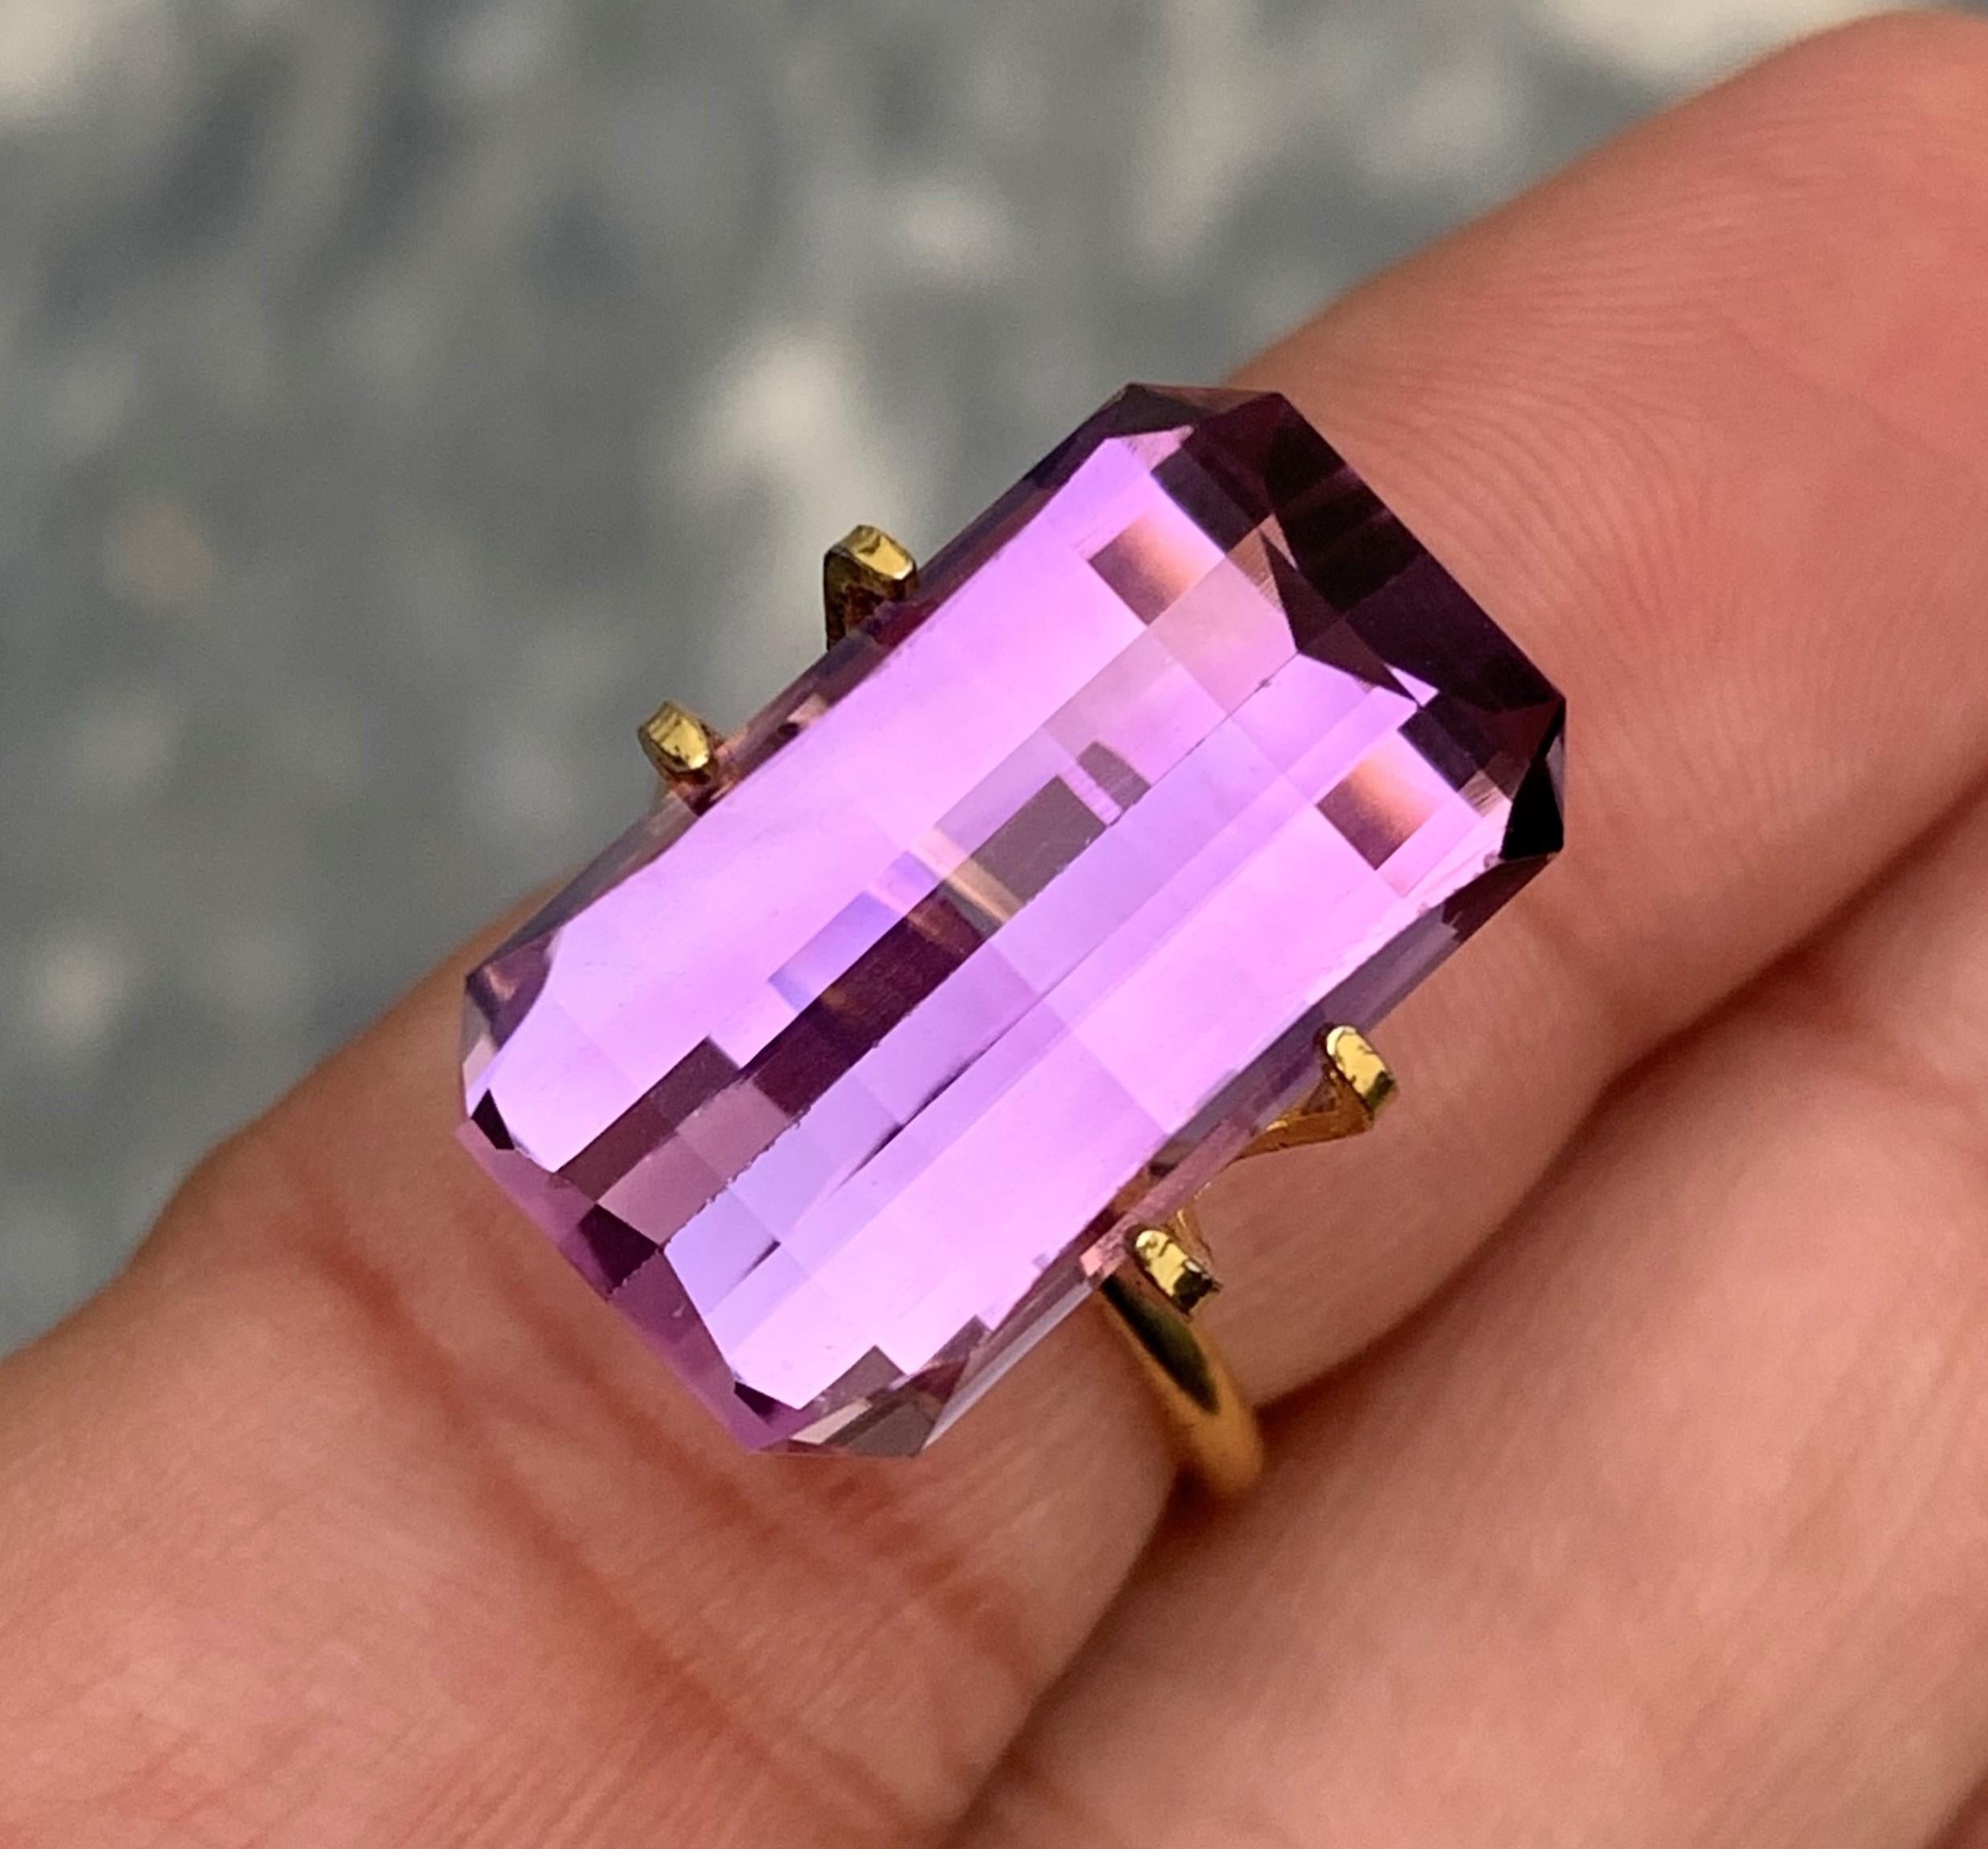 Gemstone Type : Amethyst
Weight : 14.20 Carats
Dimensions : 19.3x11.1x9.1 mm
Clarity : Eye Clean
Origin : Brazil
Color: Purple
Shape: Pixel / Bar Cut
Certificate: On Demand
Month: February
.
Purported amethyst powers for healing
enhancing the immune